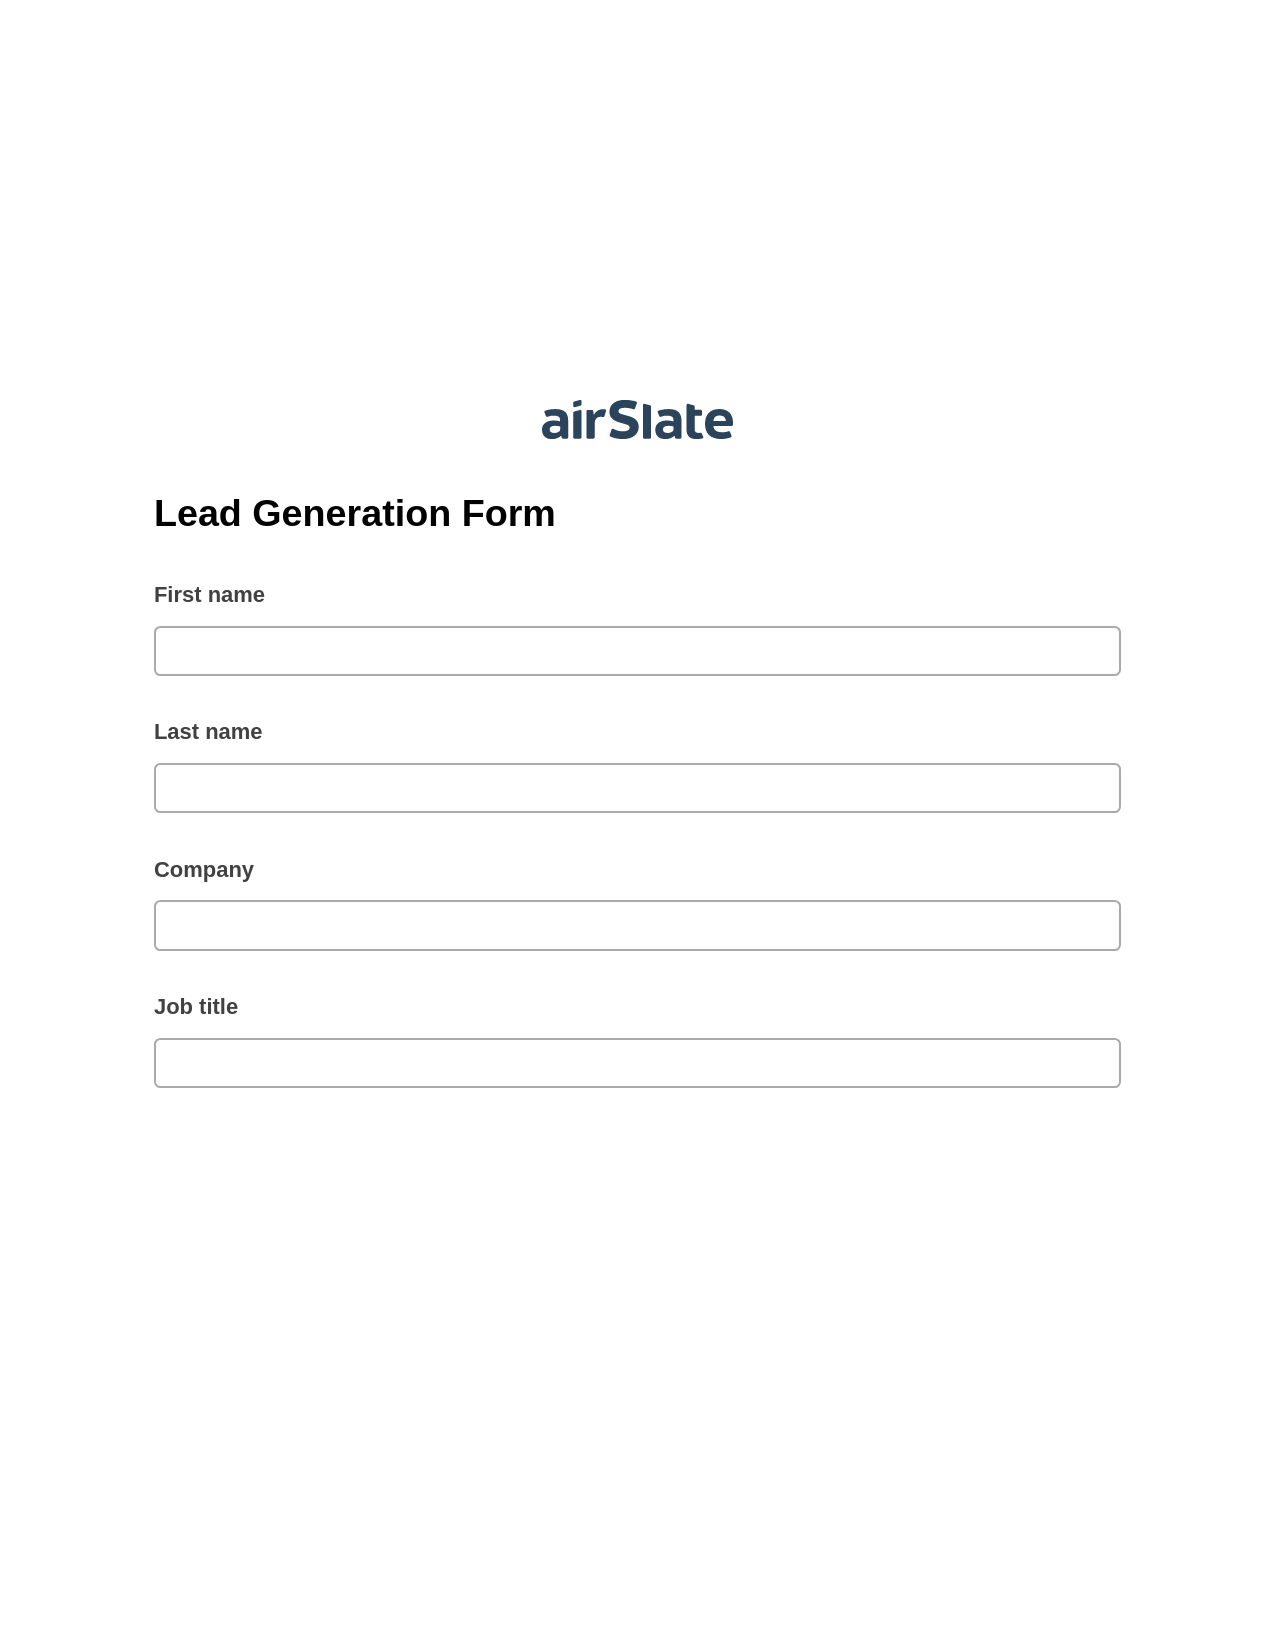 Lead Generation Form Pre-fill Dropdowns from Excel Bot, Remove Tags From Slate Bot, Archive to Google Drive Bot